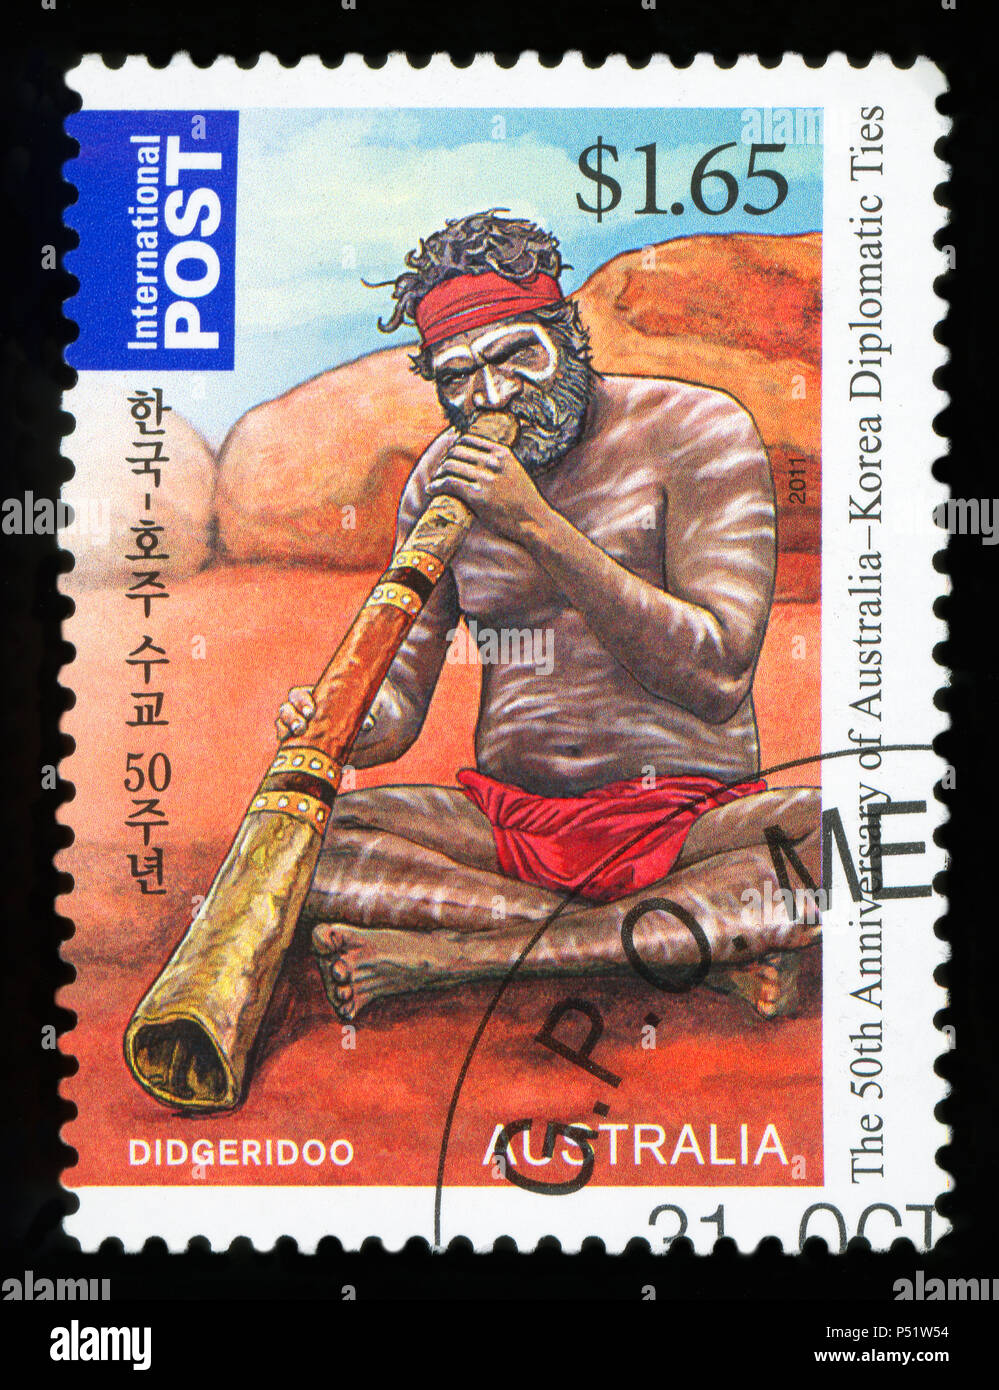 AUSTRALIA - CIRCA 2011:A Cancelled postage stamp from Australia illustrating Aboriginal playing on didgeridoo, issued in 2011. Stock Photo